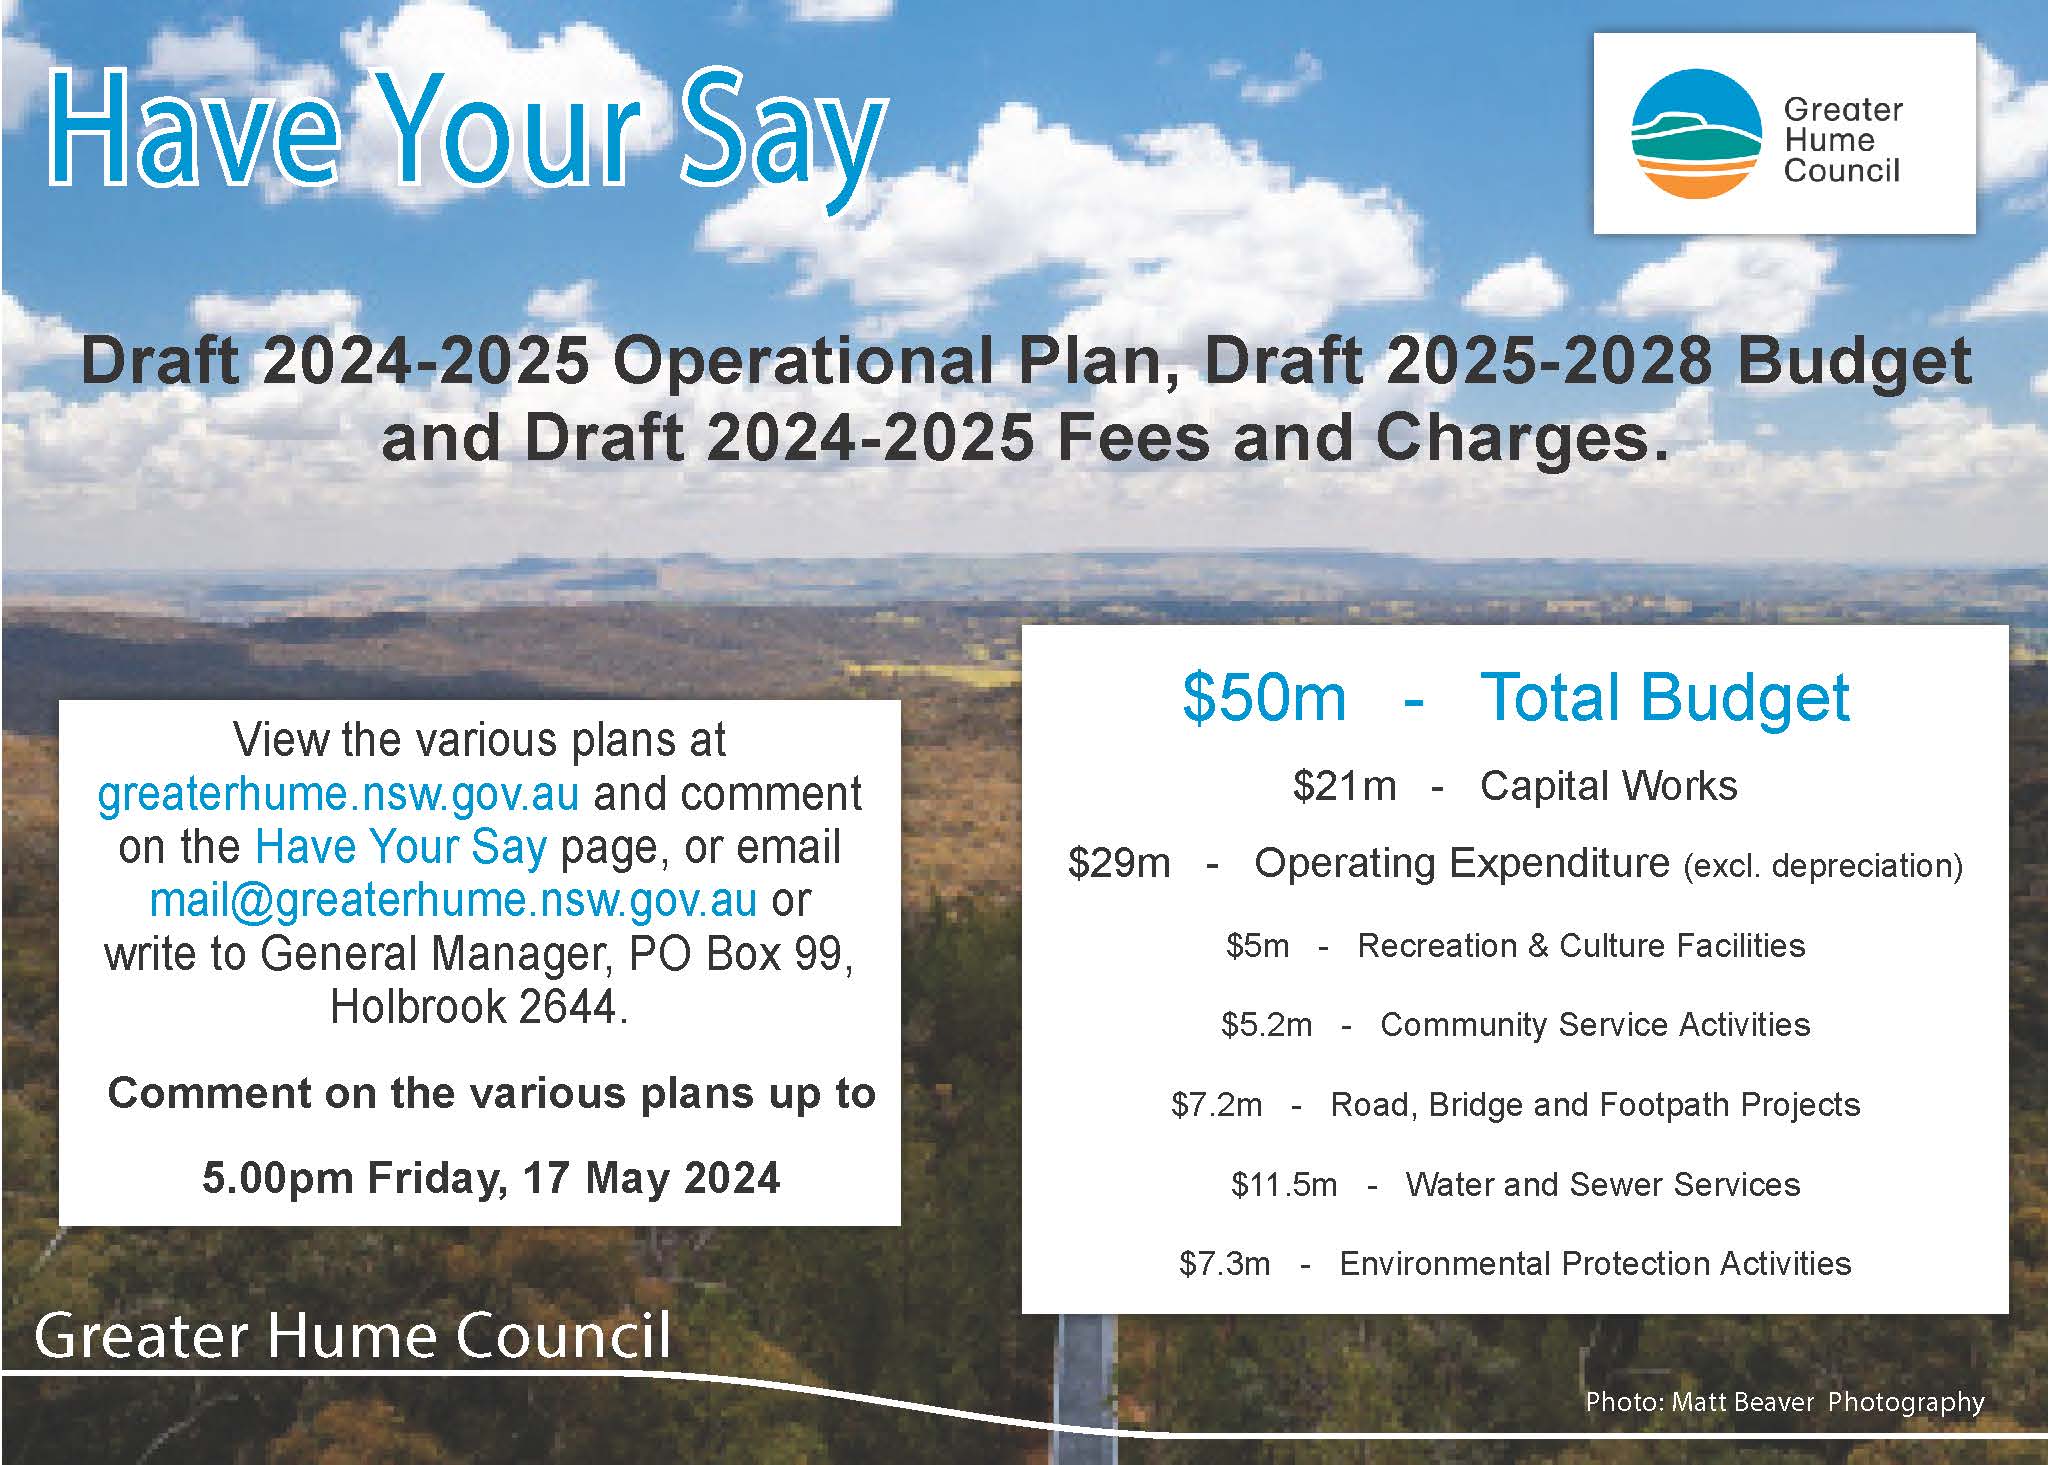 Advert-Draft-2024-2025-Operational-Plan-and-Fees-and-Charges-2025-2028-Budget.jpg